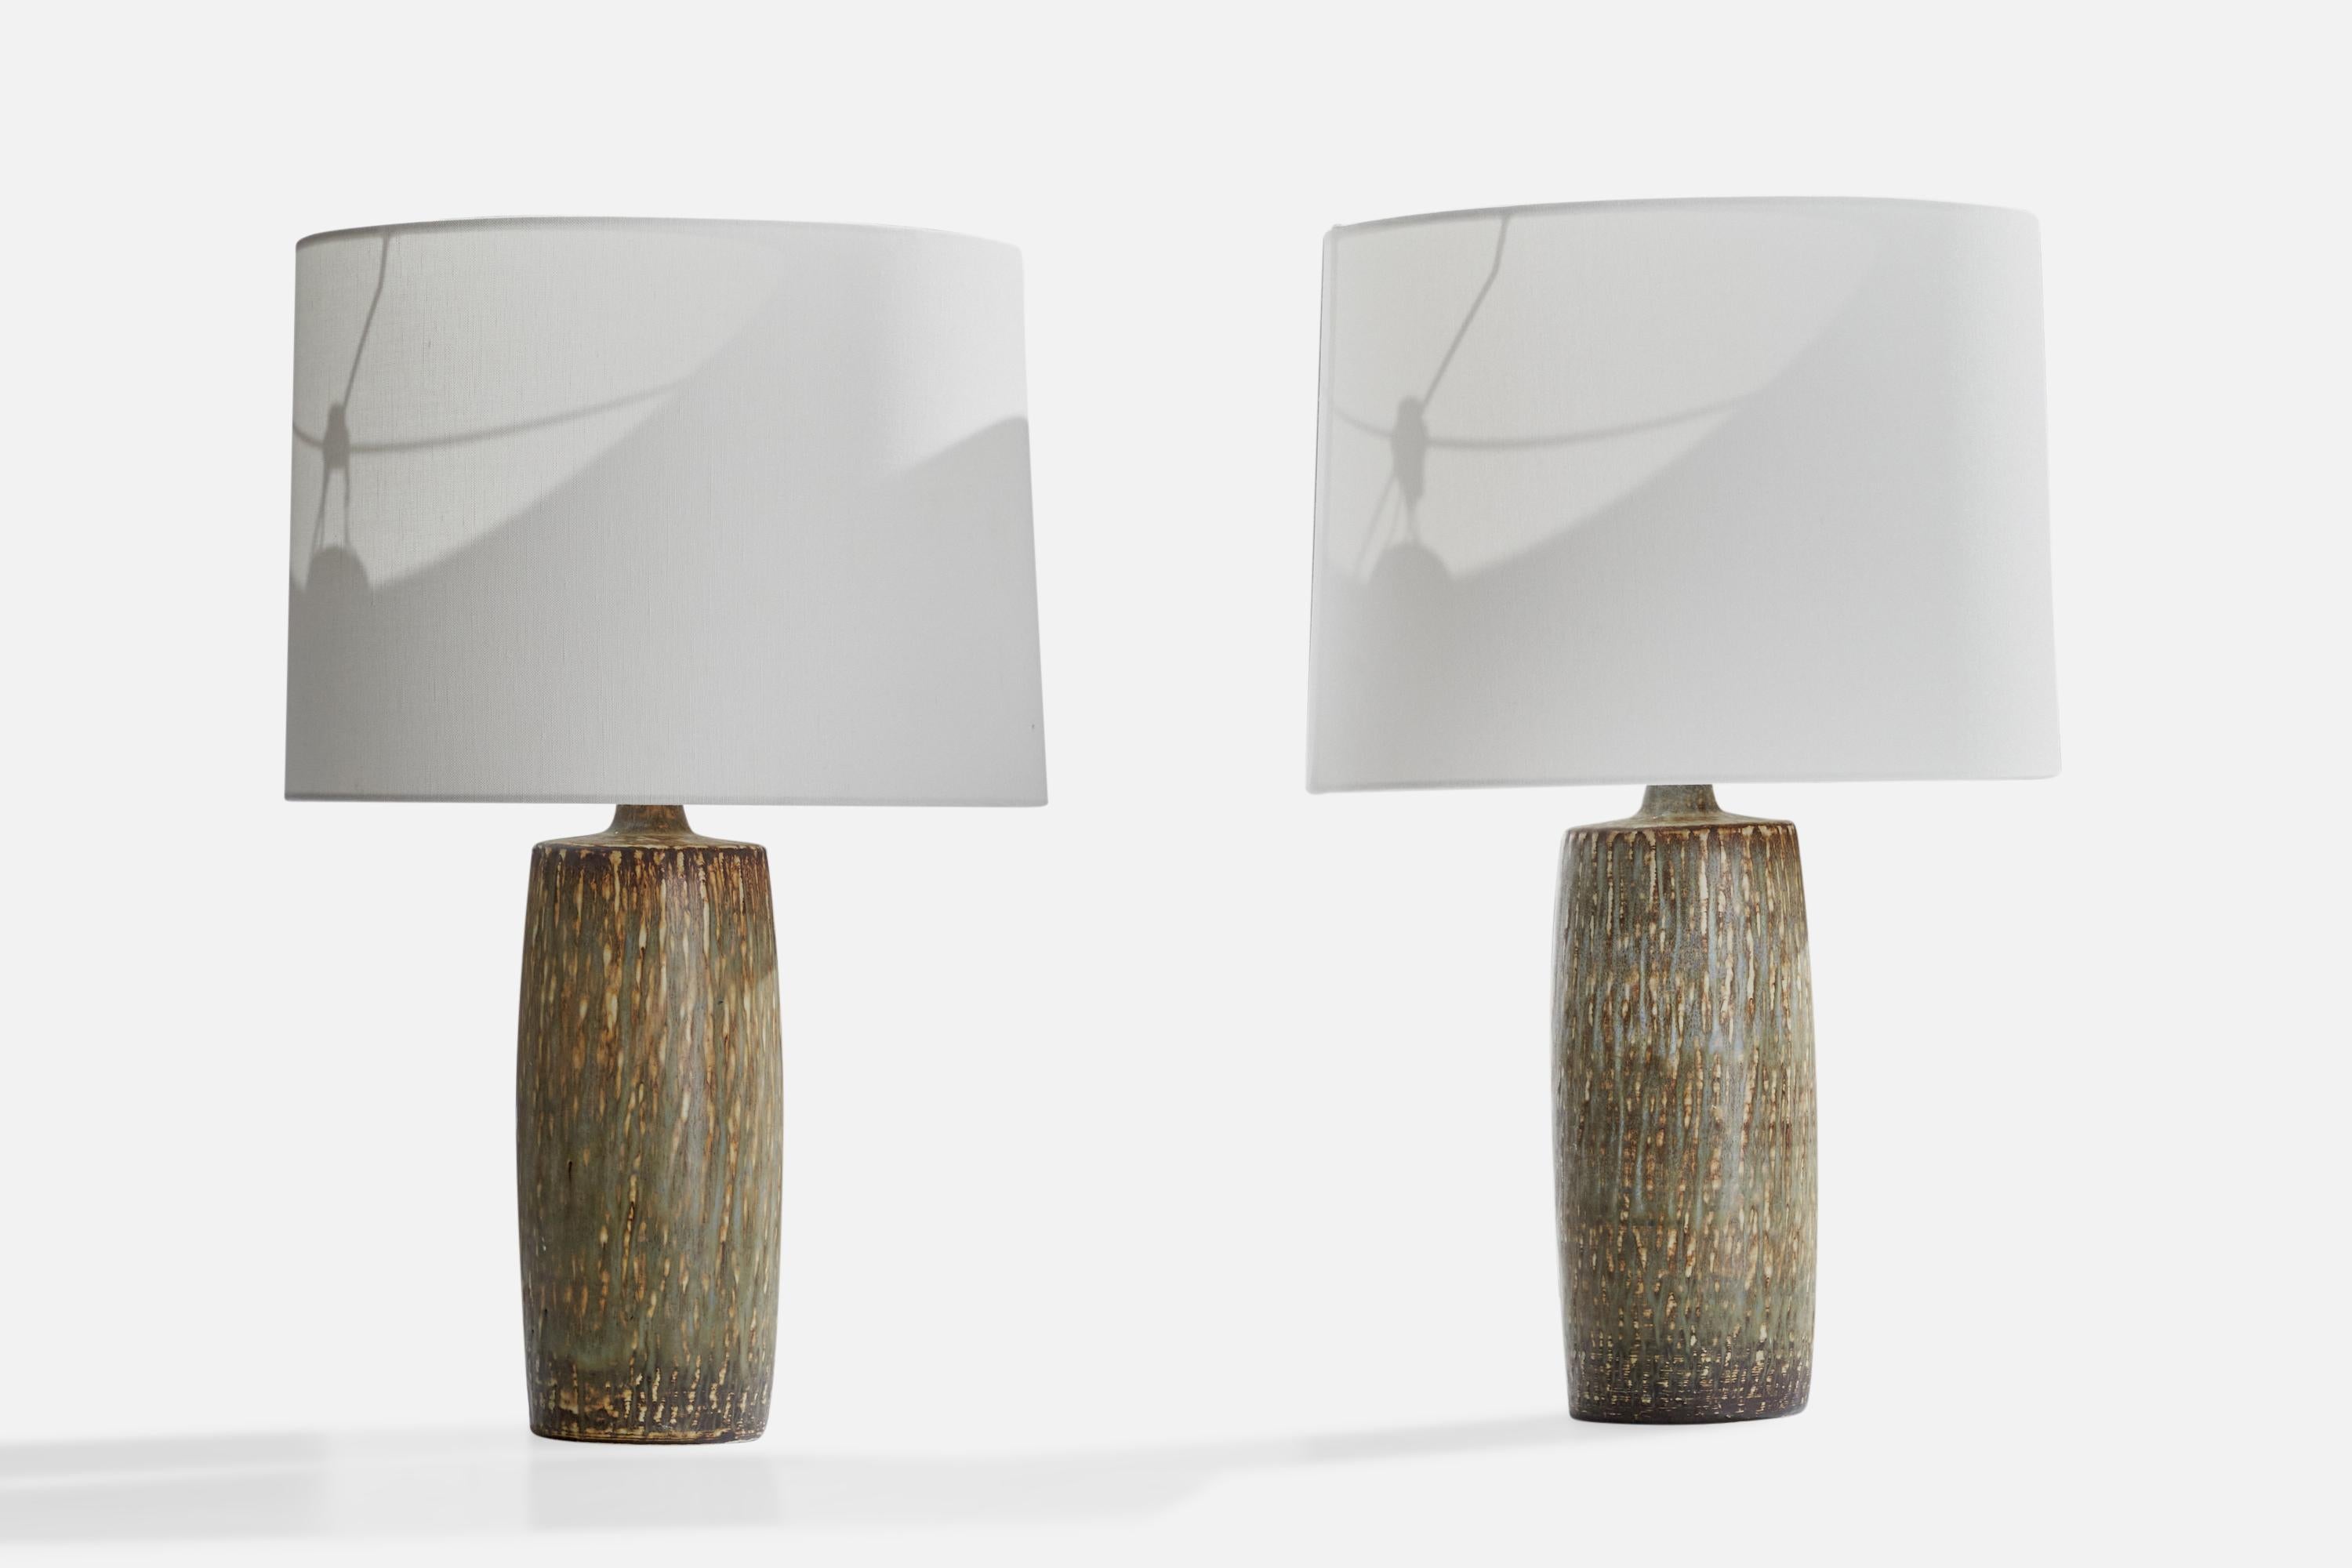 A pair of green, grey and brown-glazed stoneware table lamps designed by Gunnar Nylund and produced by Rörstrand, Sweden, 1940s.

Dimensions of Lamp (inches): 15.5”  H x 5” Diameter
Dimensions of Shade (inches): 13” Top Diameter x 14